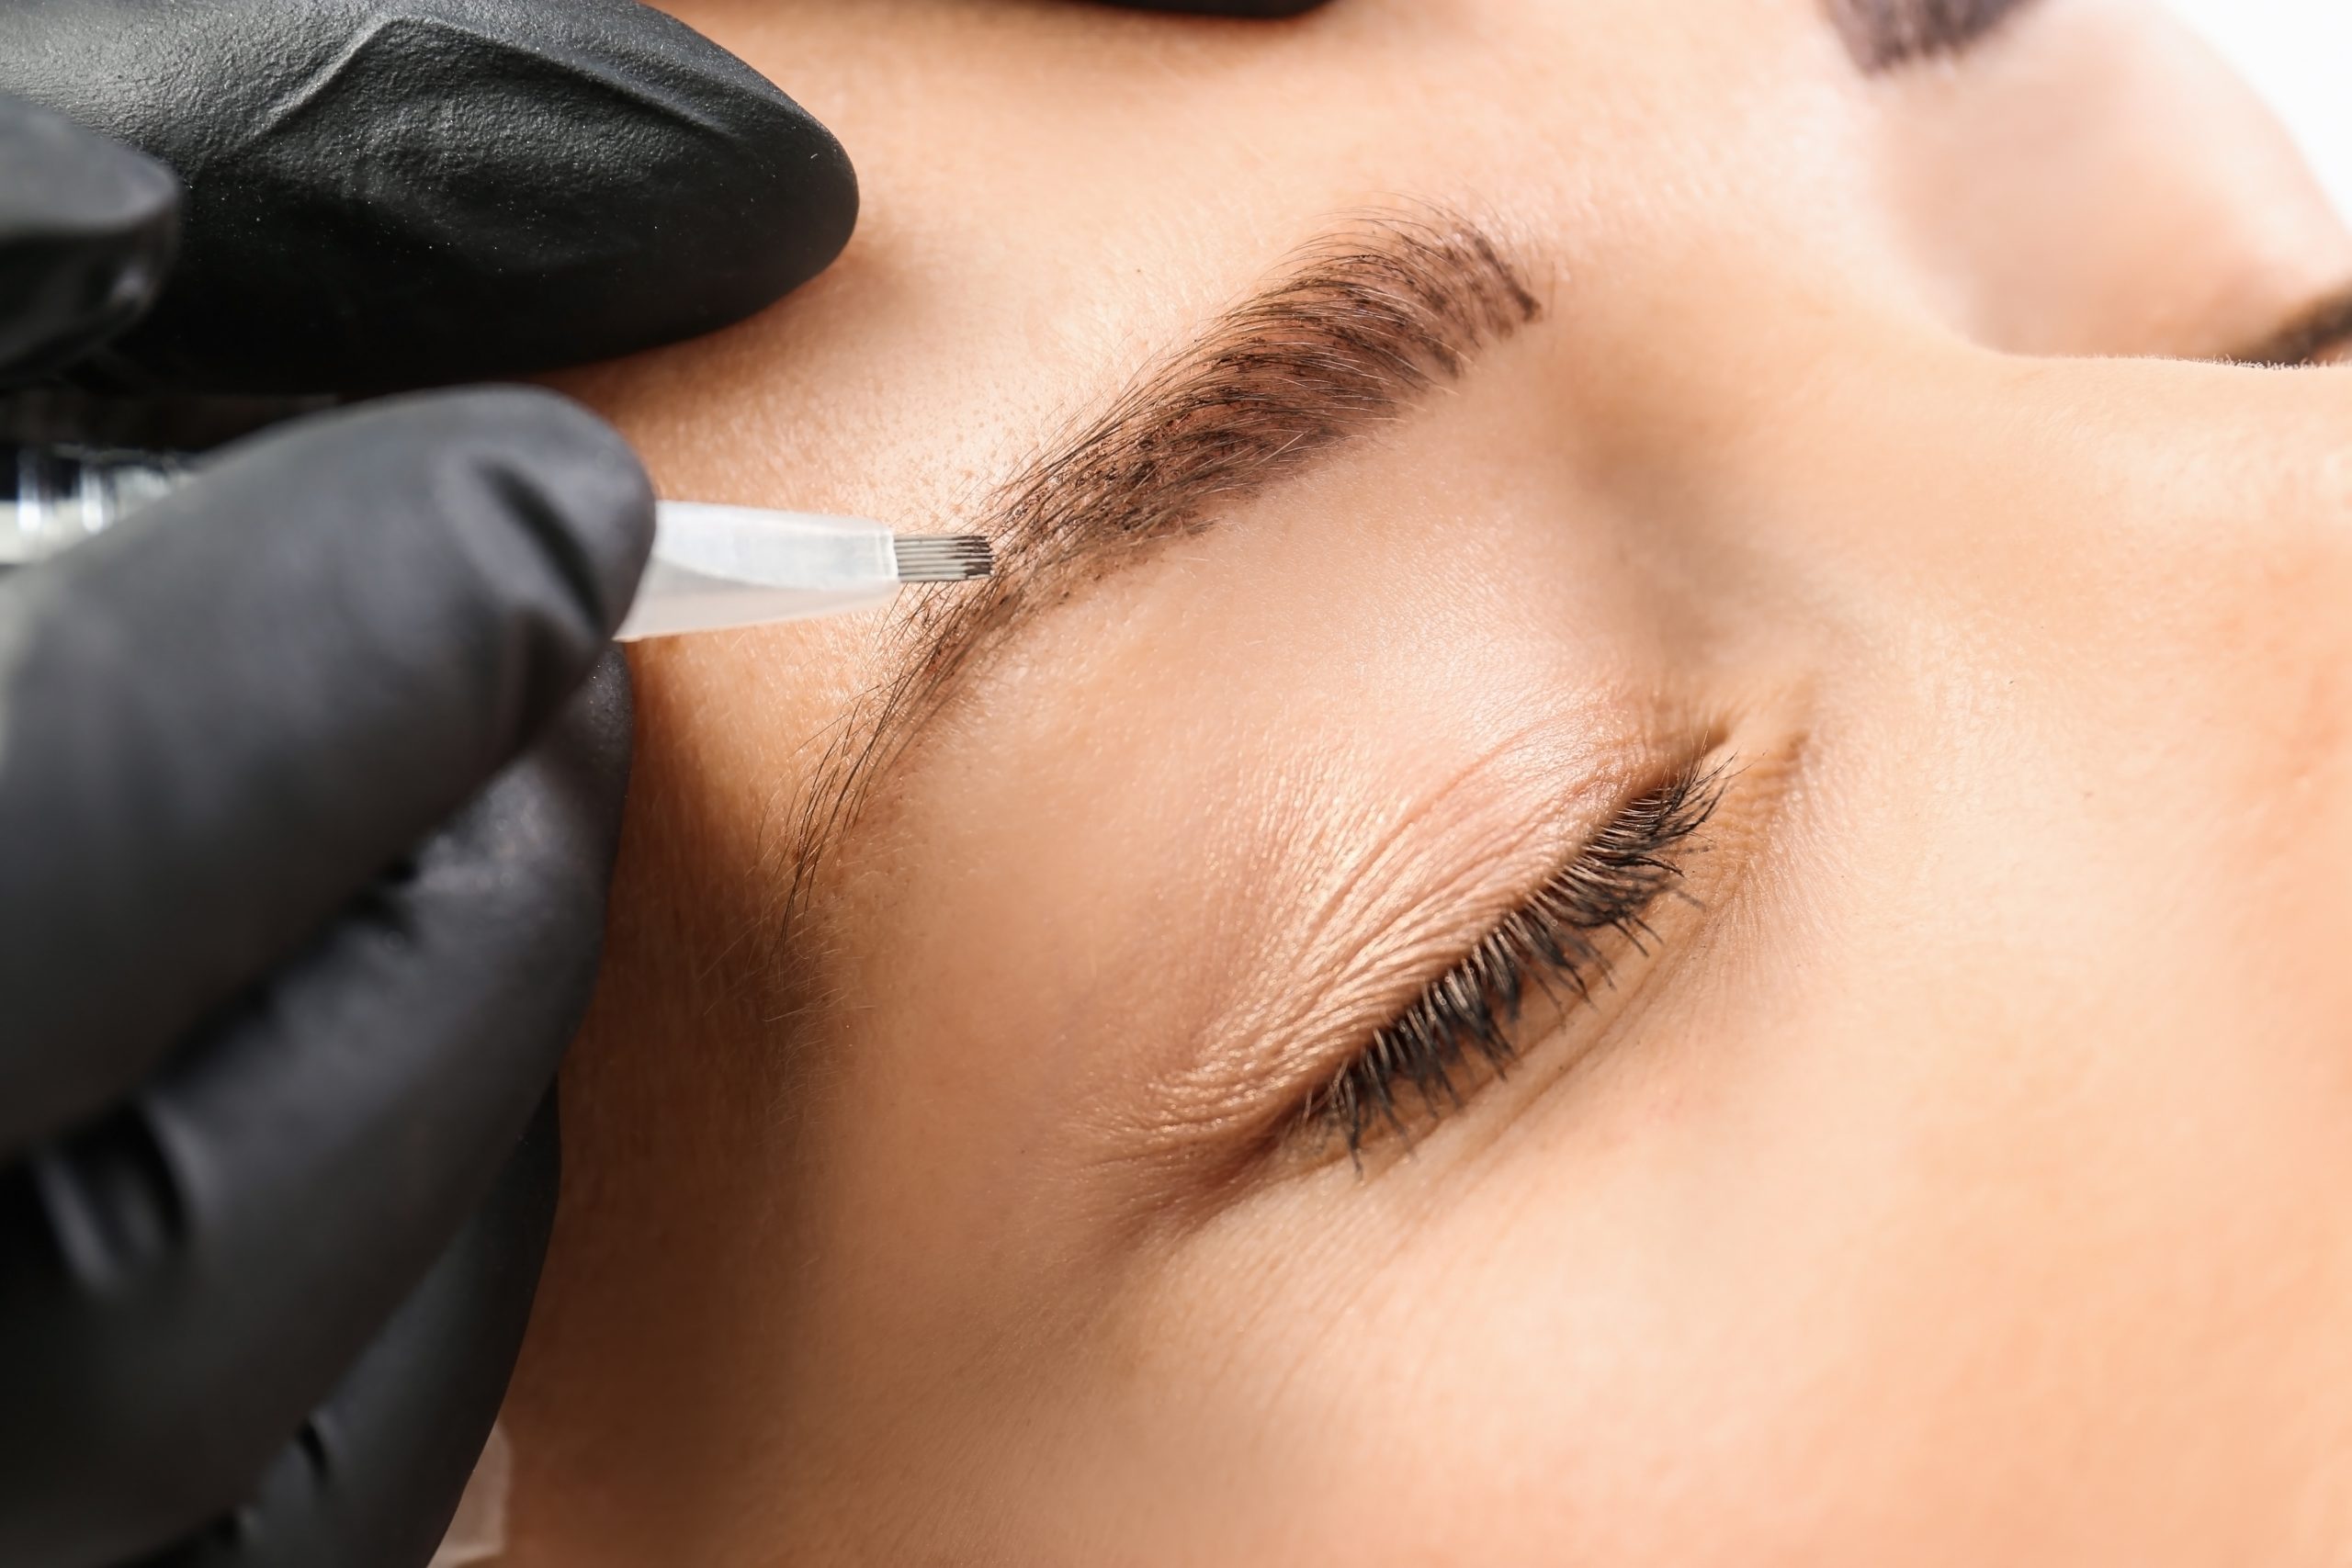 Is Microblading Different from Eyebrow Tattooing?